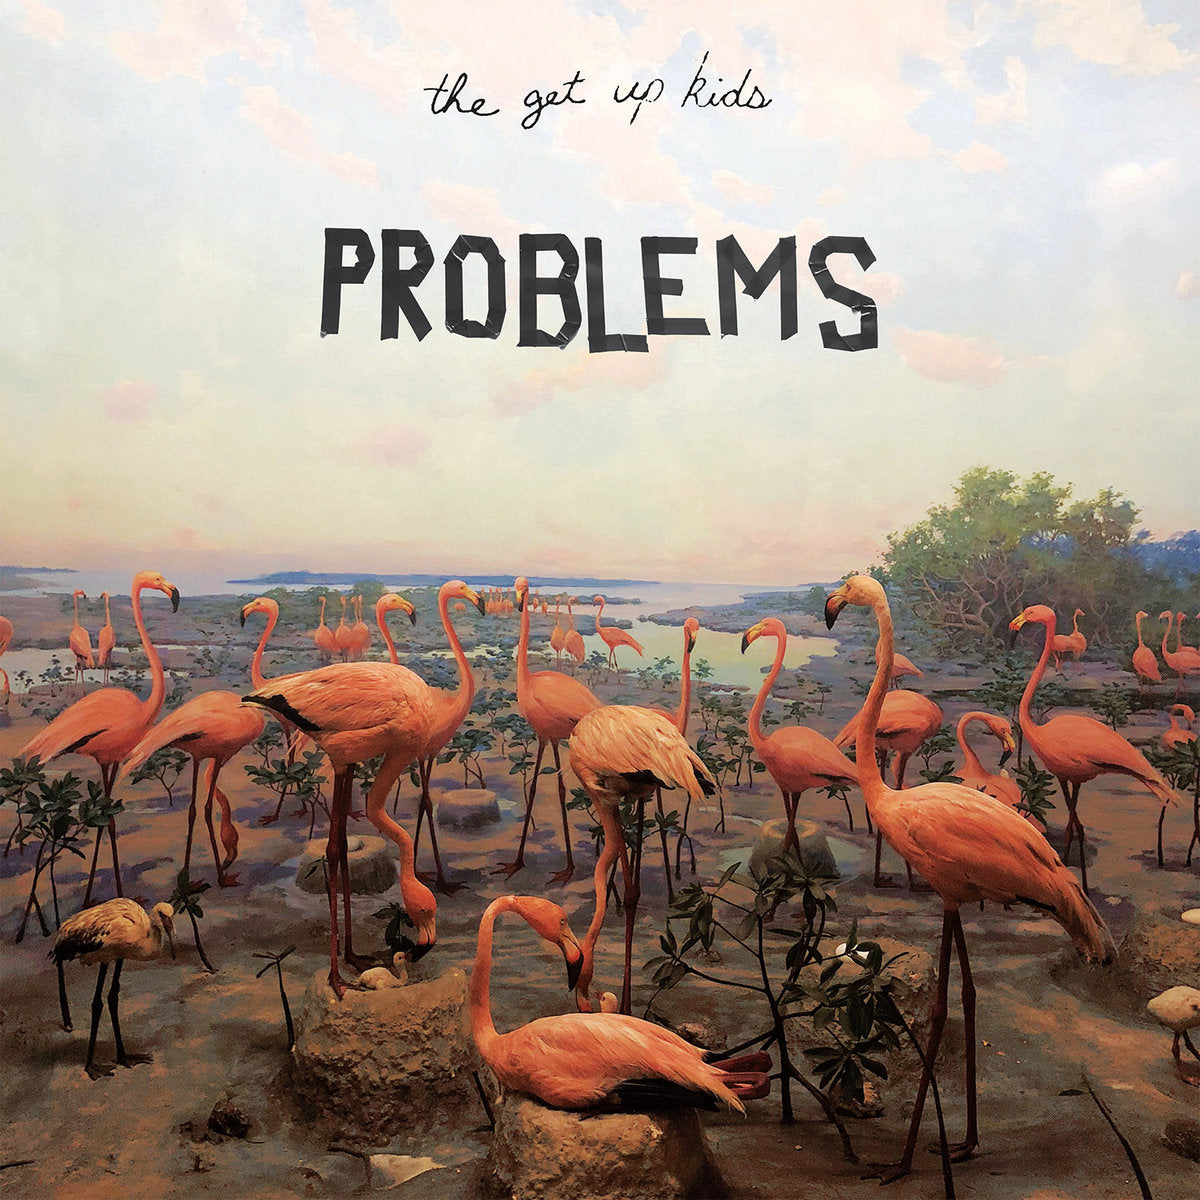 The get up kids / Problems